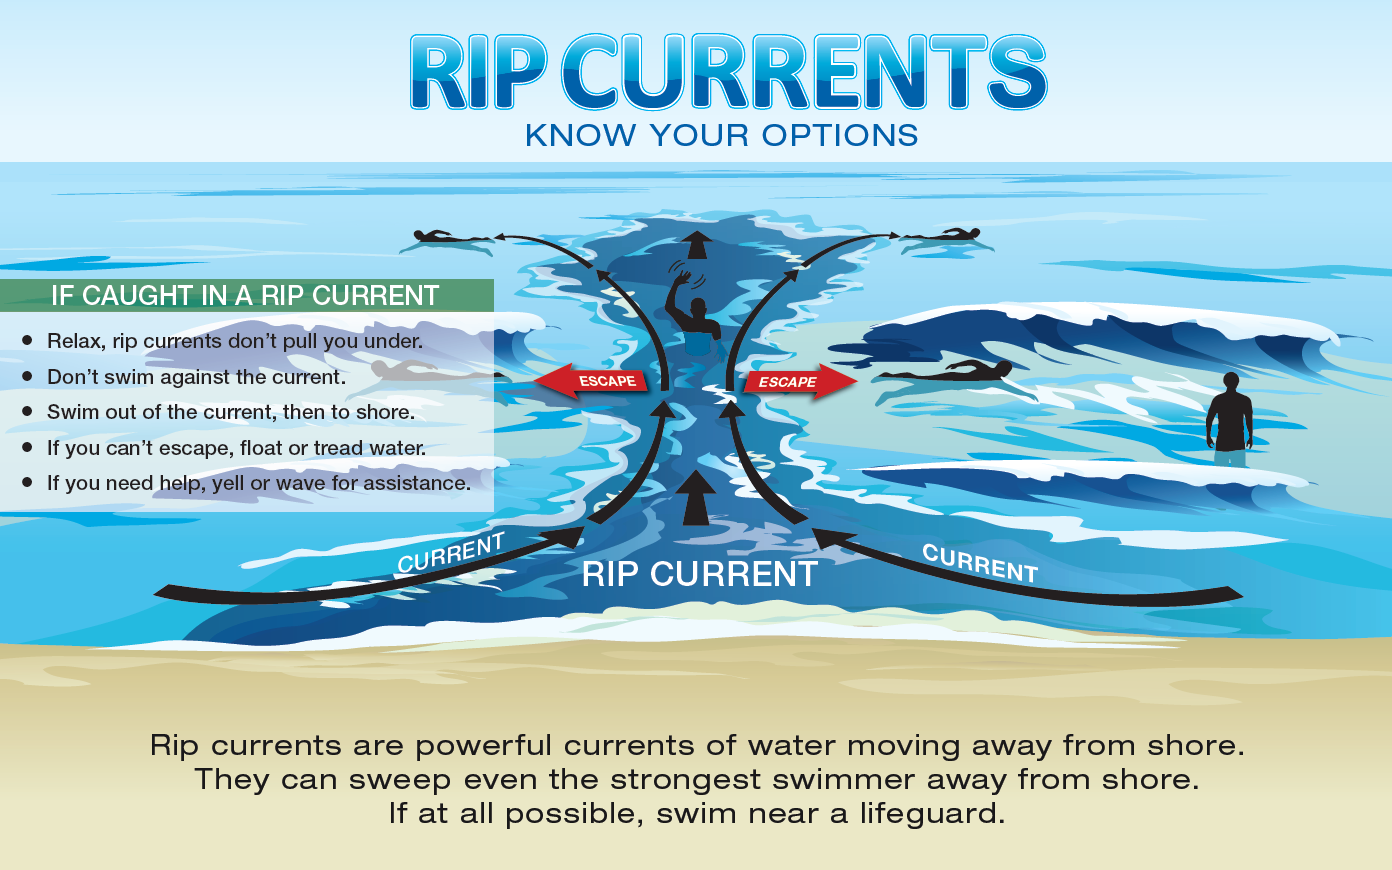 Rip currents Know Your Options infographic